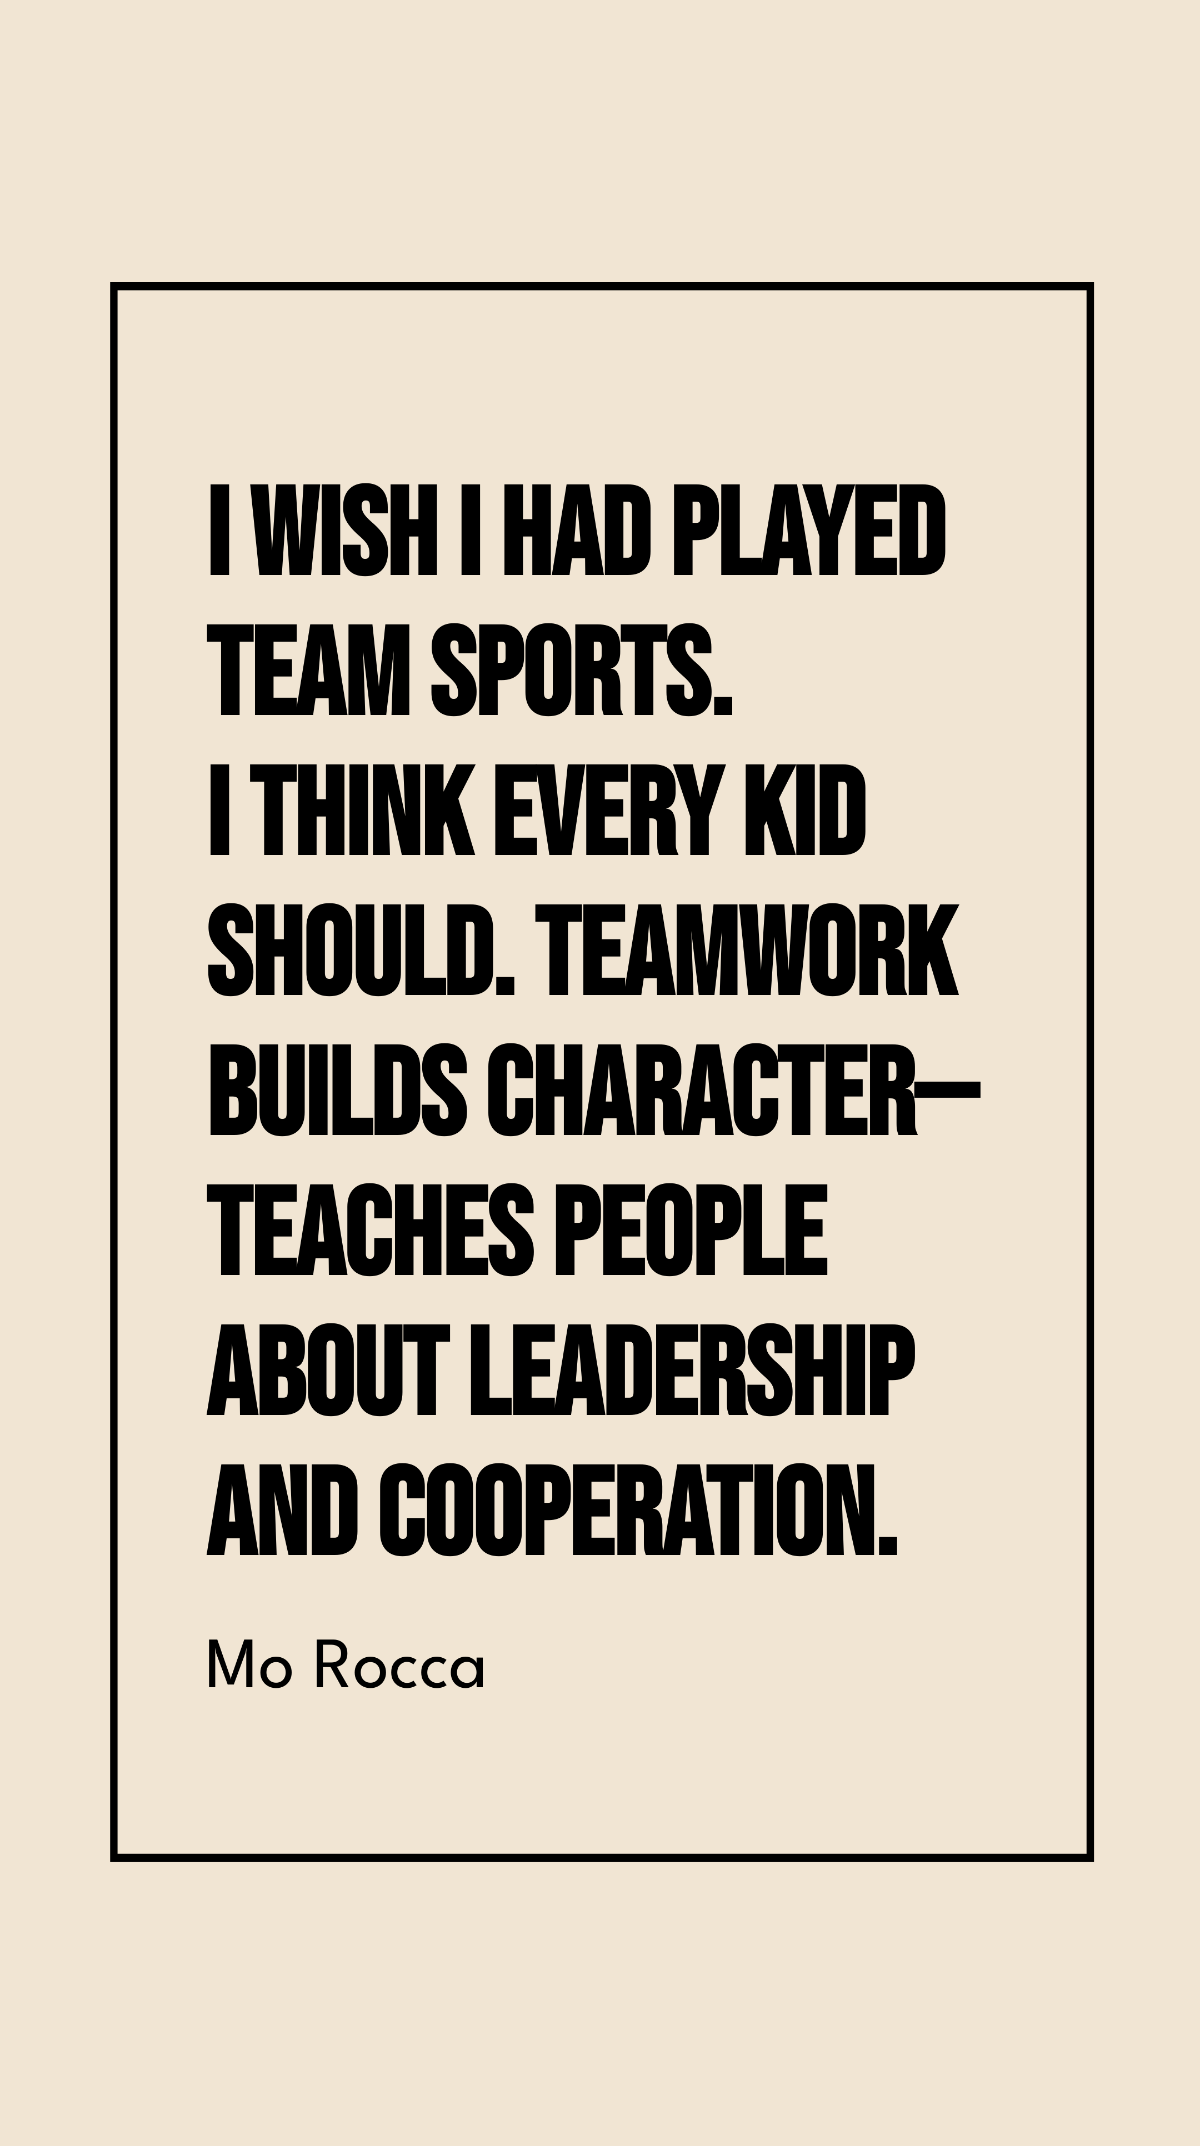 Mo Rocca - I wish I had played team sports. I think every kid should. Teamwork builds character - teaches people about leadership and cooperation.